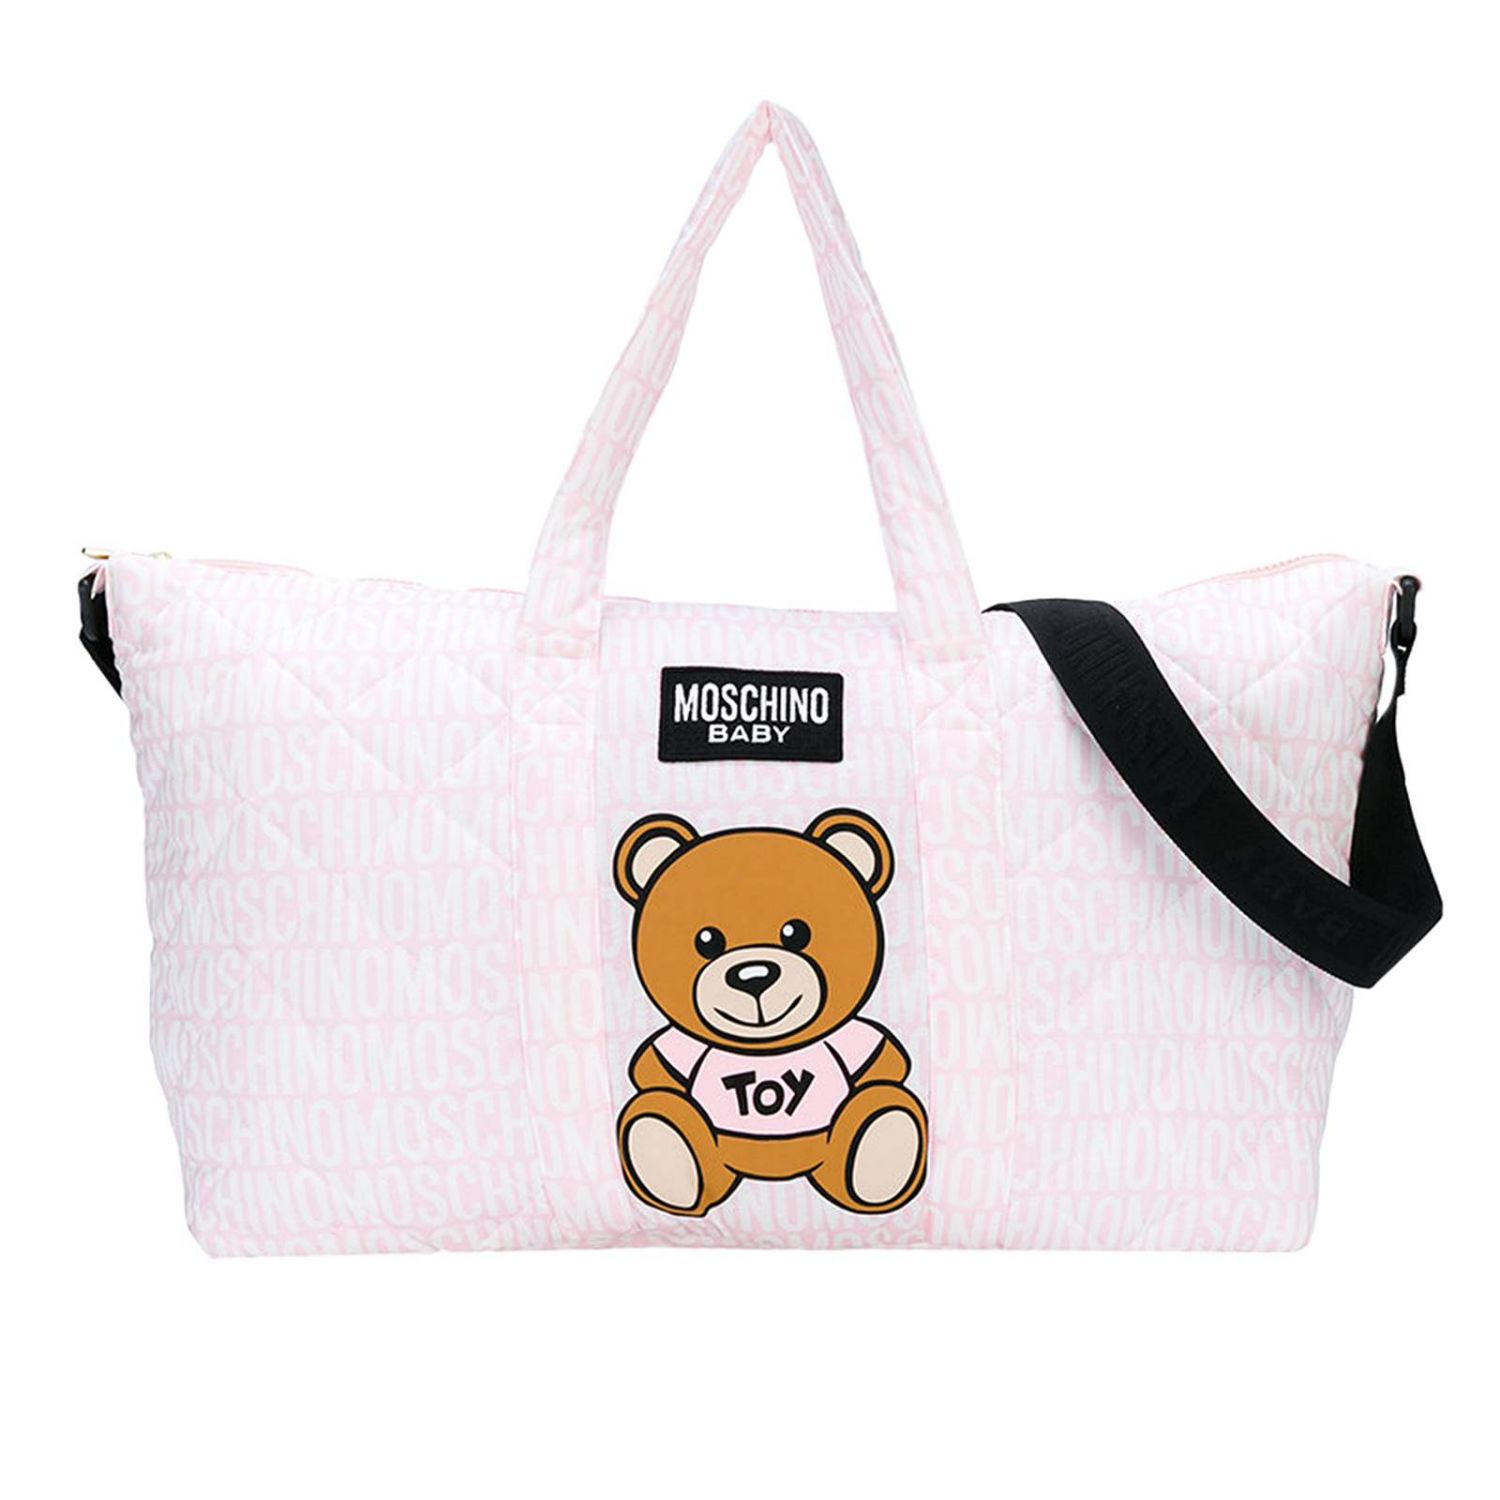 Moschino Baby Outlet: Bag kids - Pink | Bag Moschino Baby MWX02Y LAB03 ...